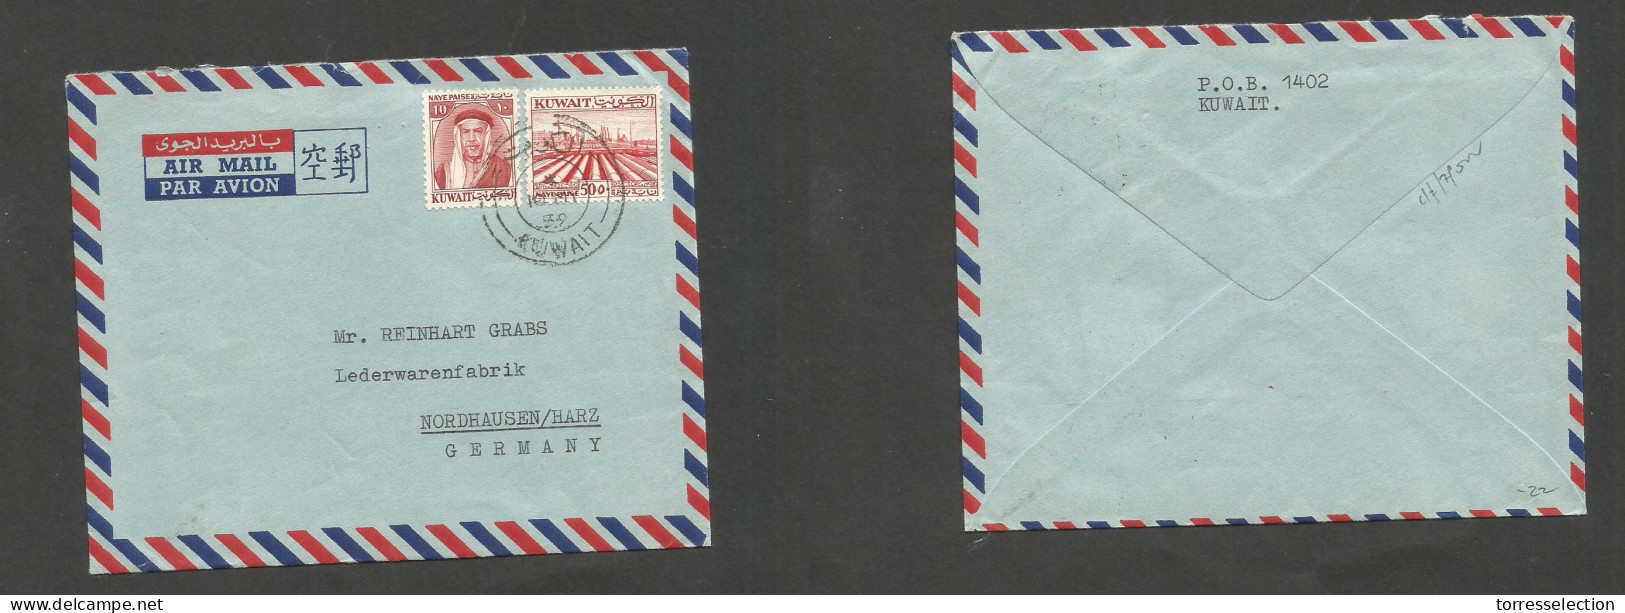 KUWAIT. 1959 (10 May) GPO - Germany, Nordhausen, Harz. Air Multifkd Envelope With Contains. Fine. - Koweït